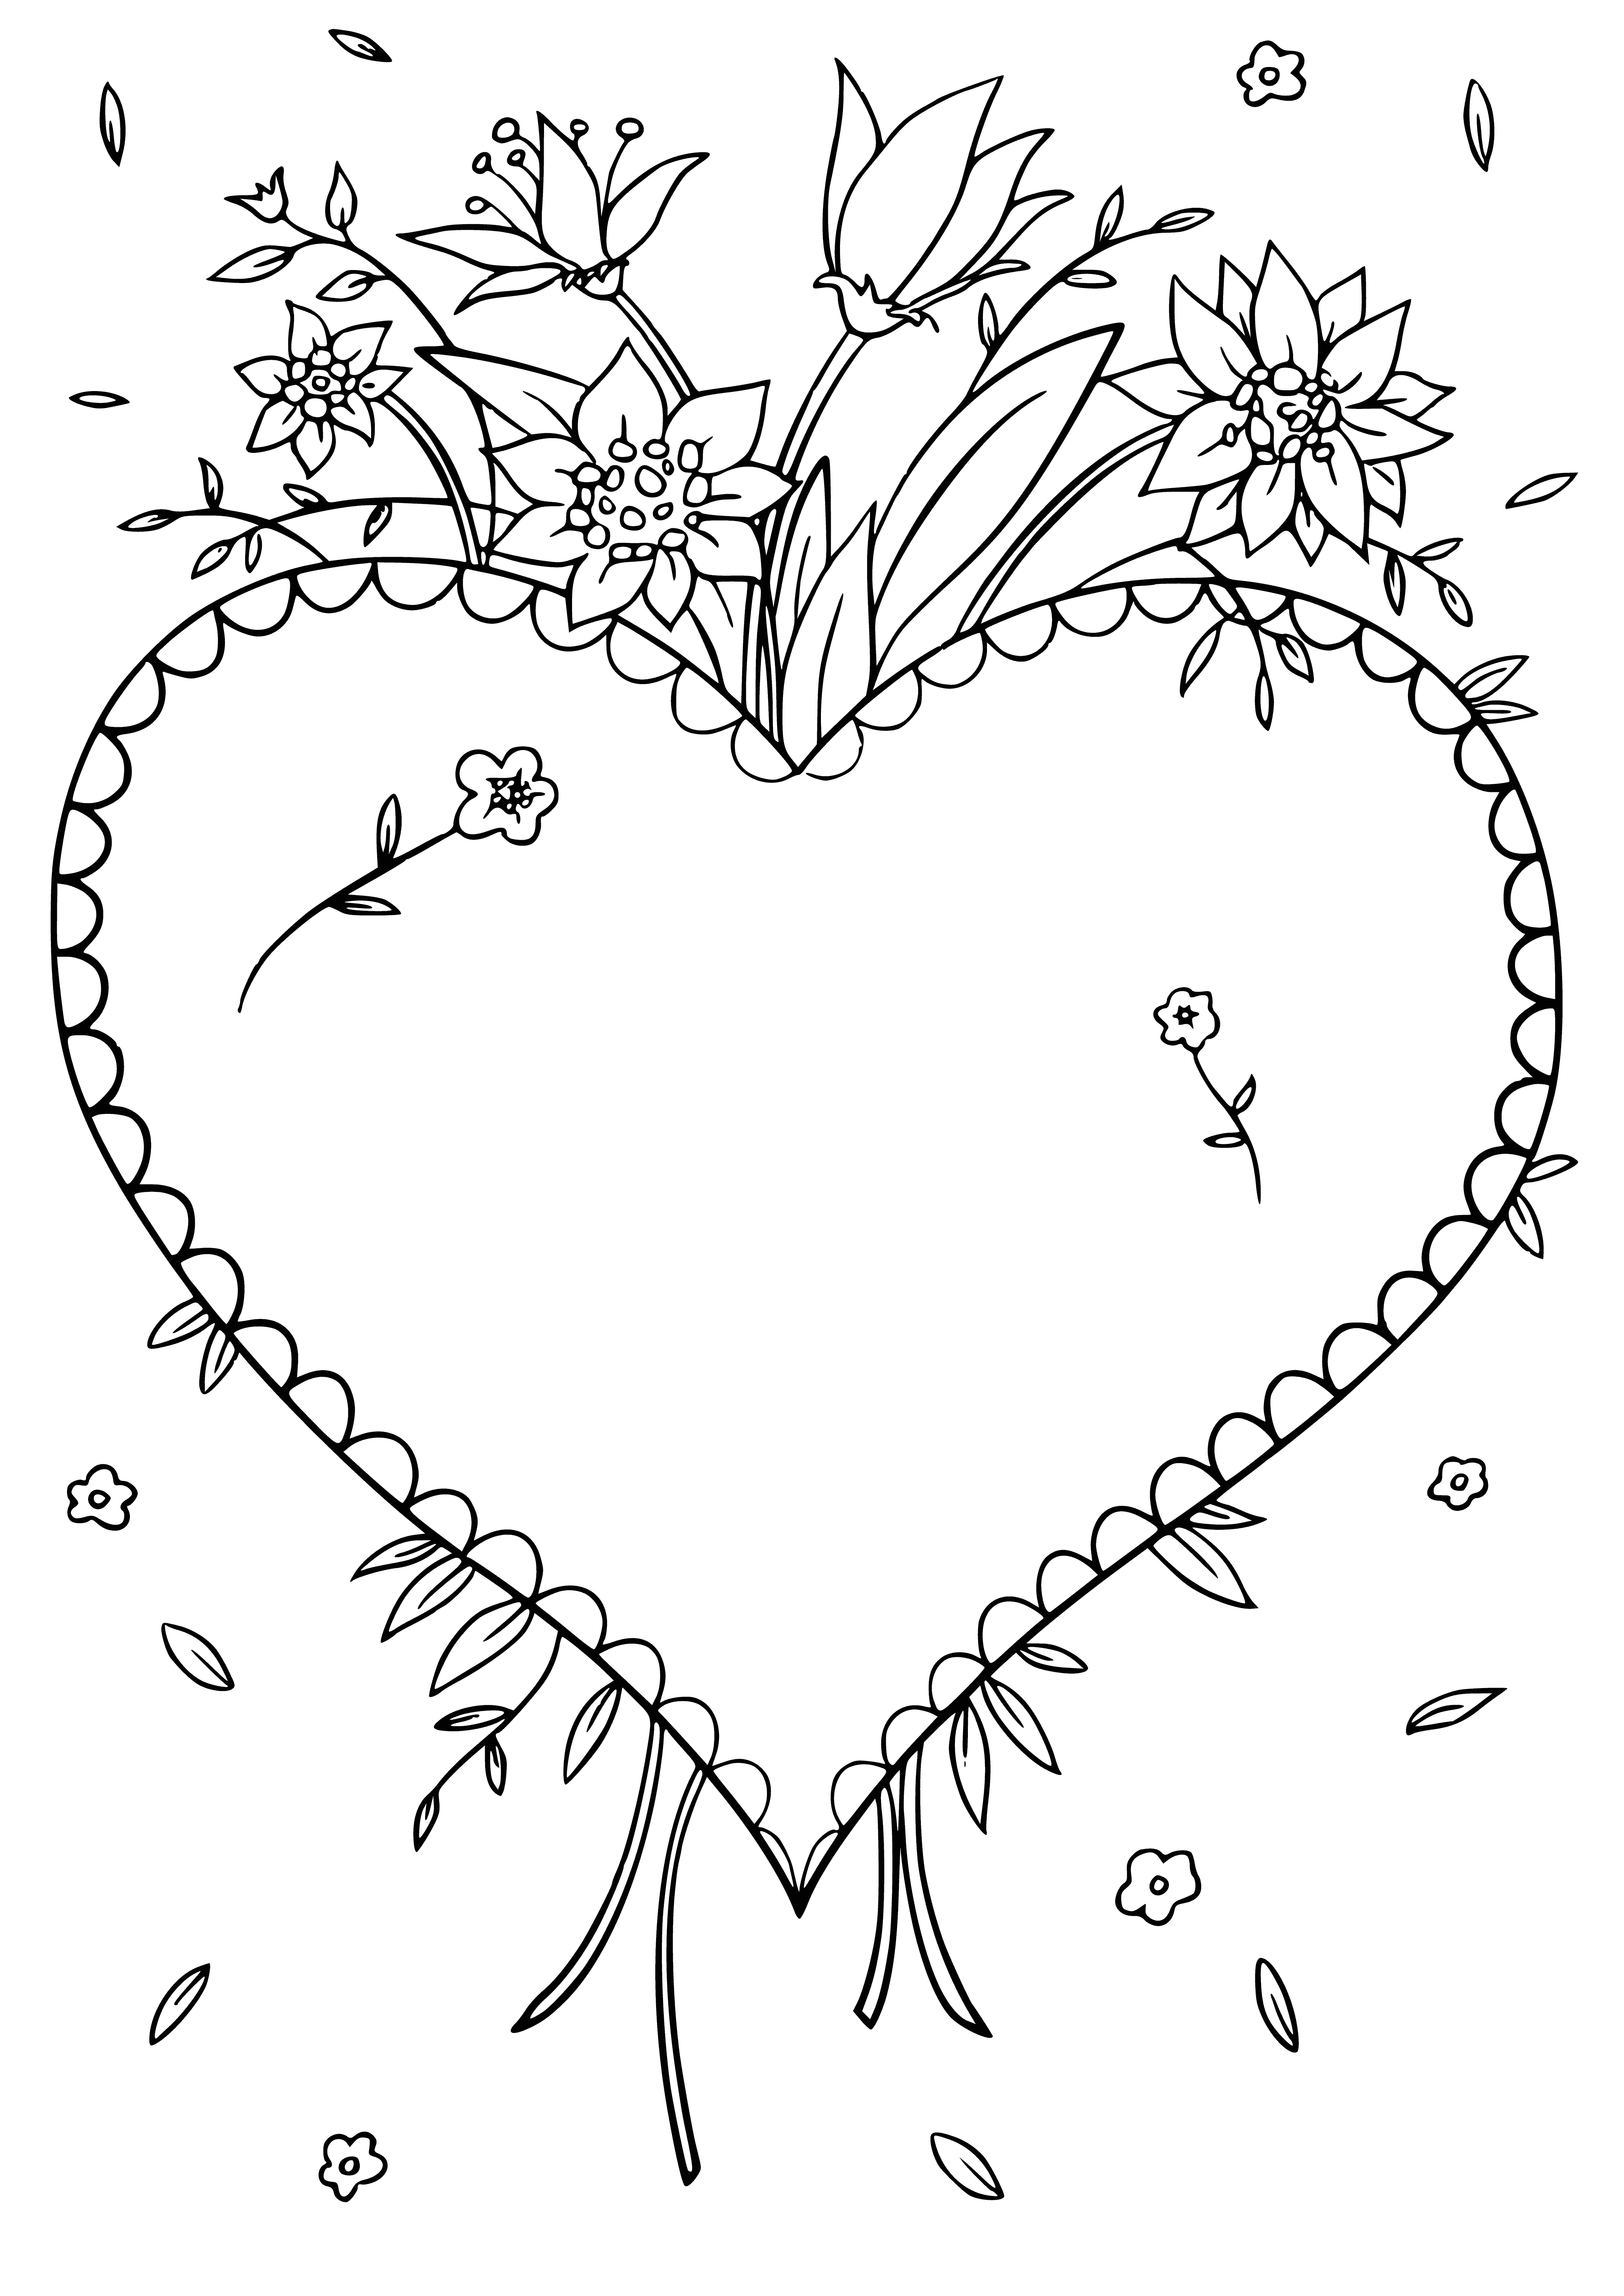 Festive heart coloring page